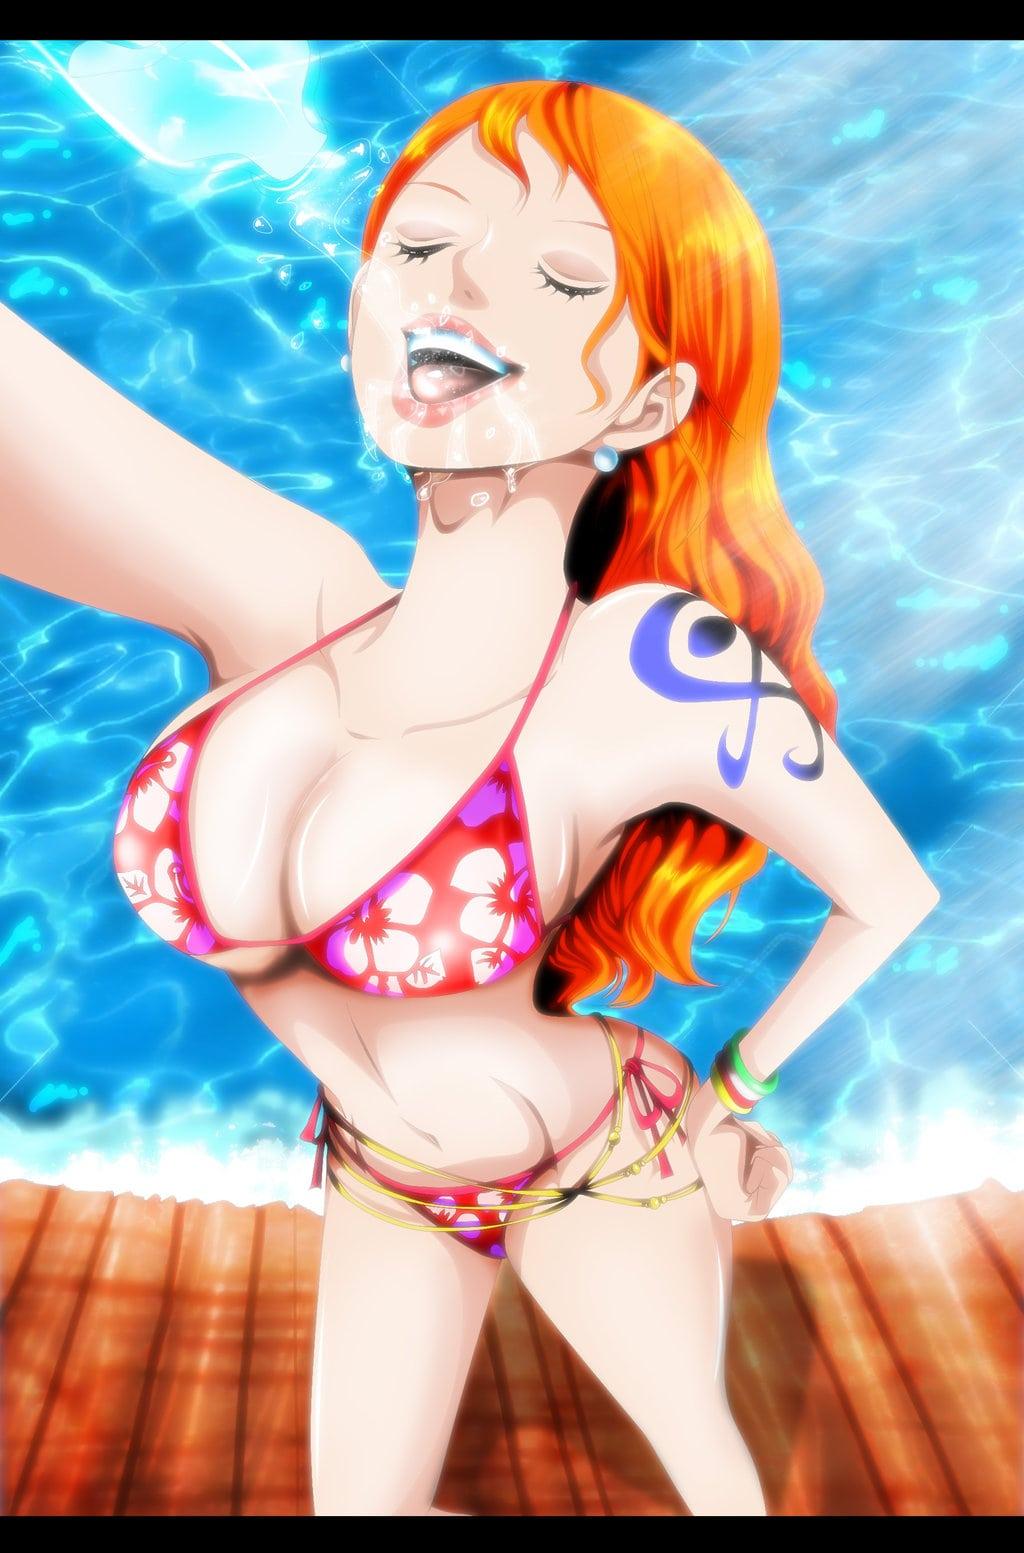 75+ Hot Pictures Of Nami from One Piece Are Really Amazing Best Of Comic Bo...